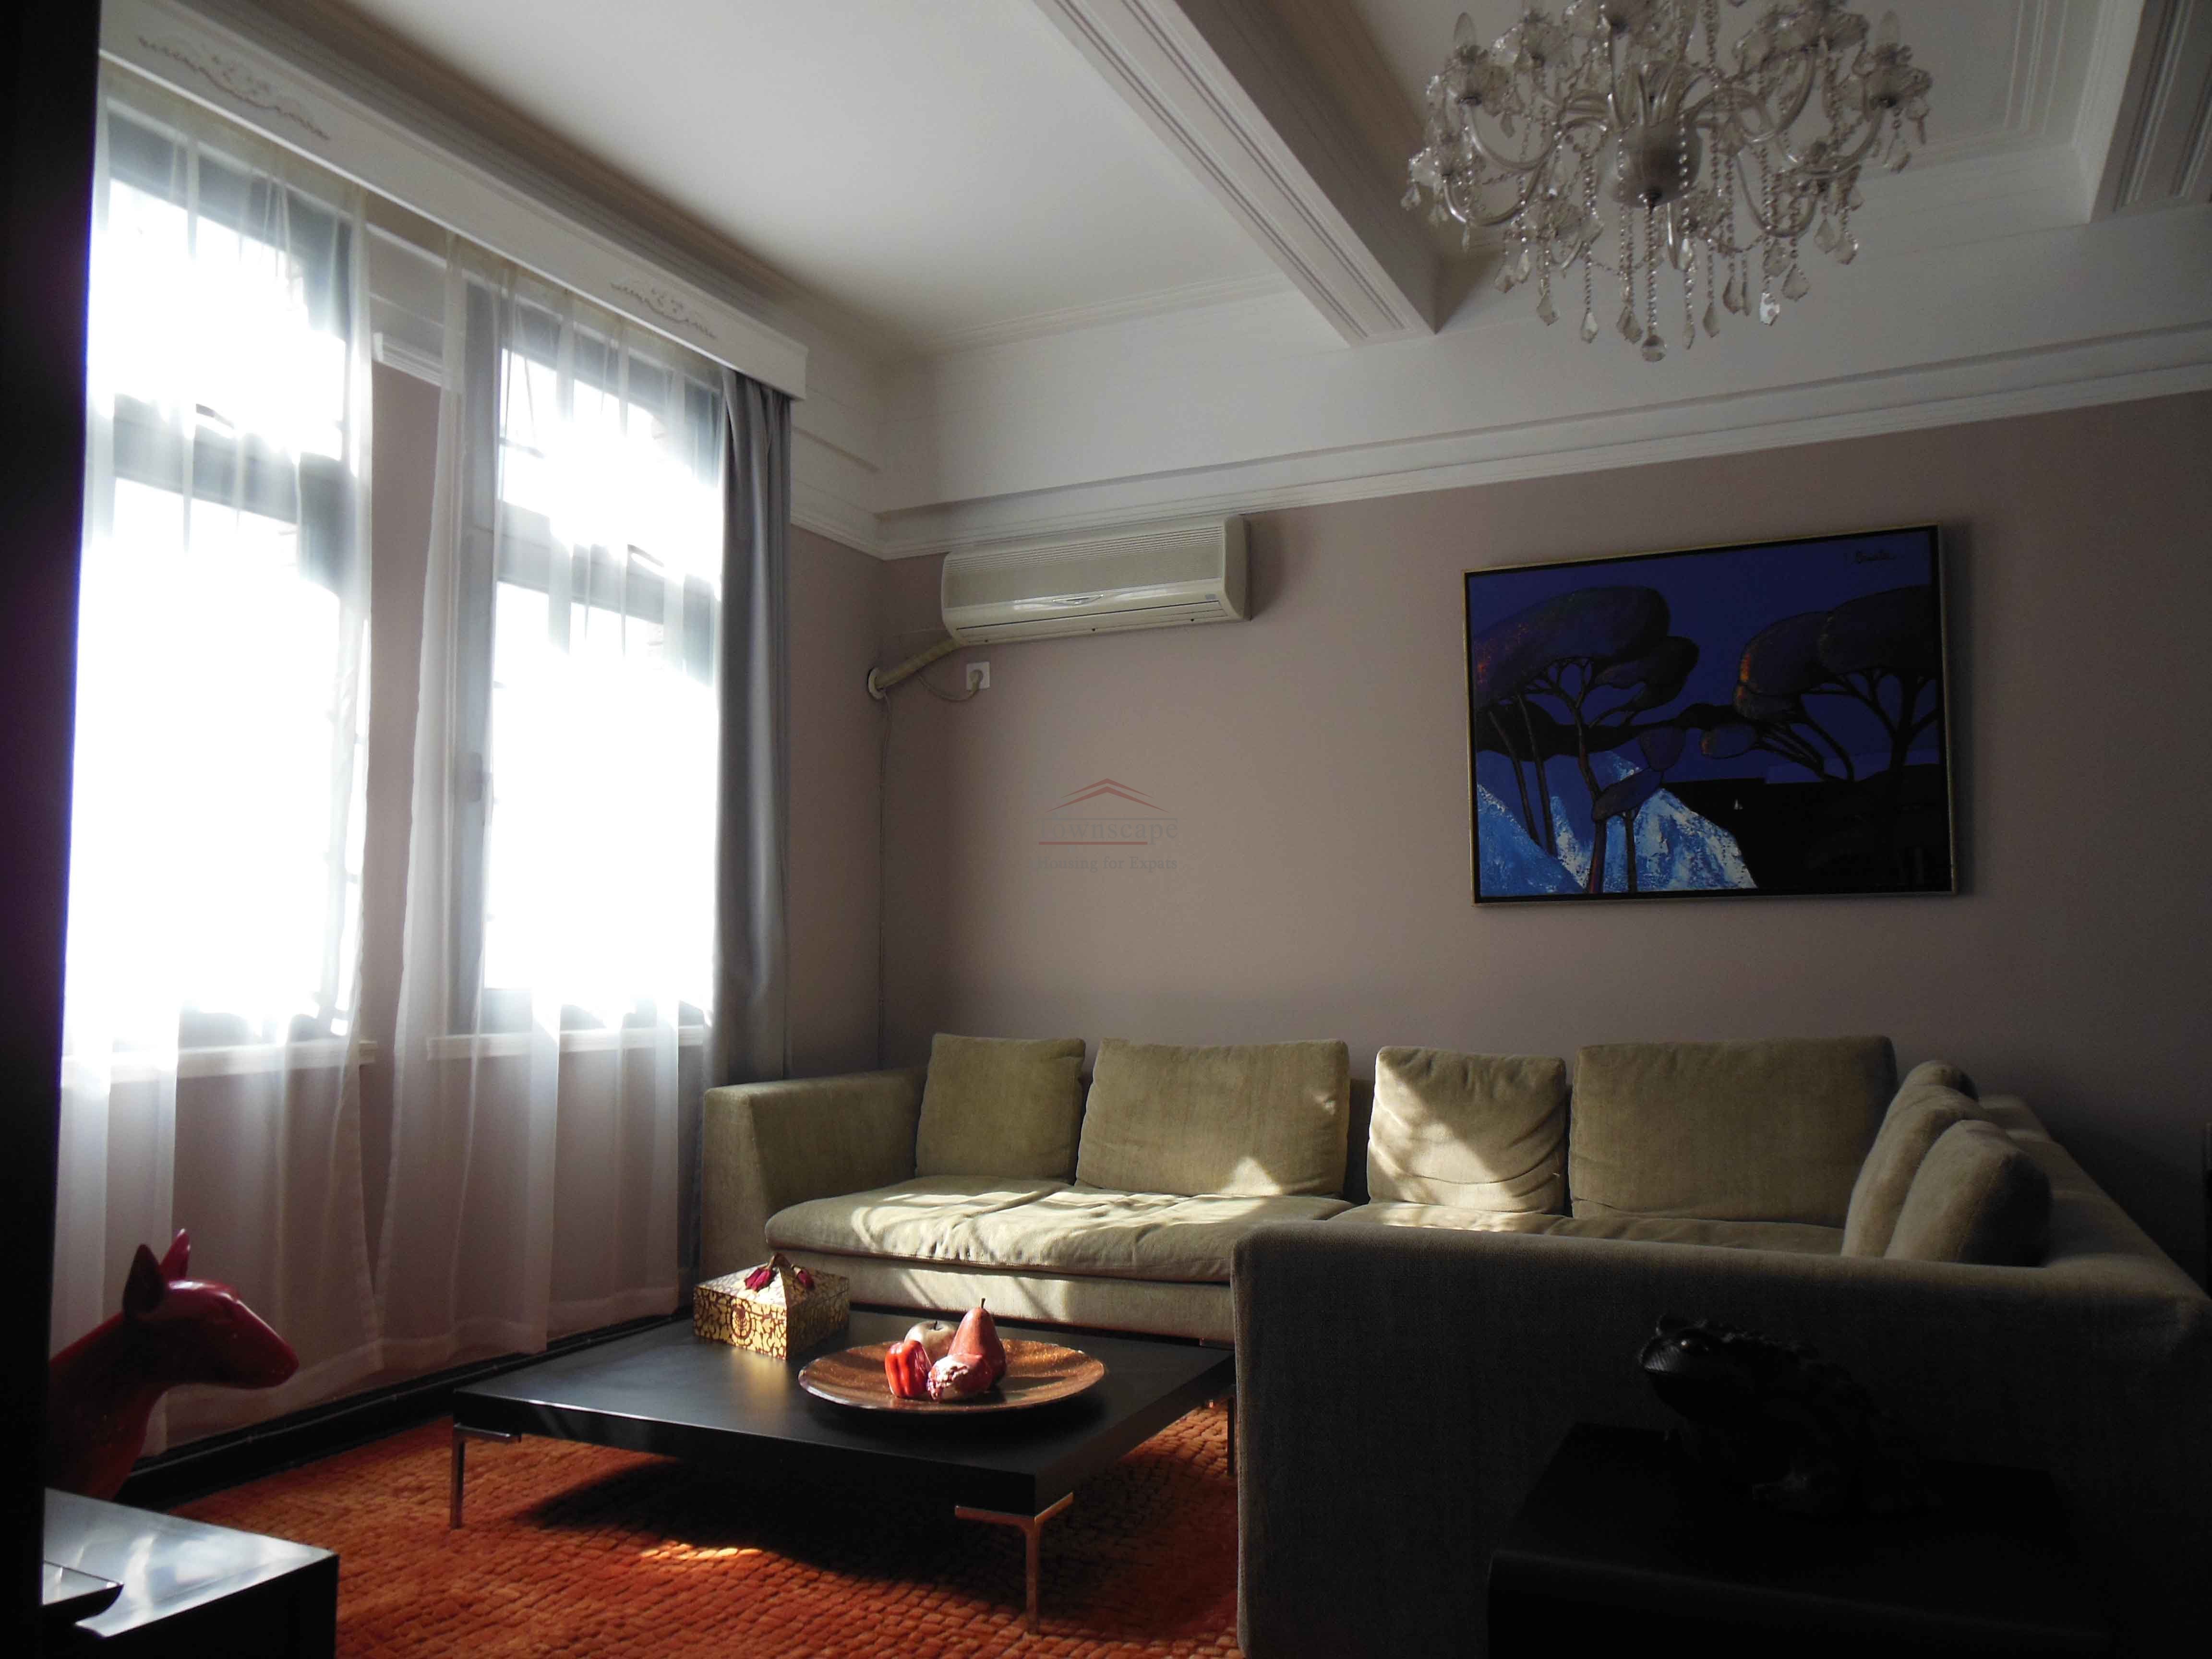 Shanghai house 3 Bedroom Apt. West Nanjing rd. L2 w/Library